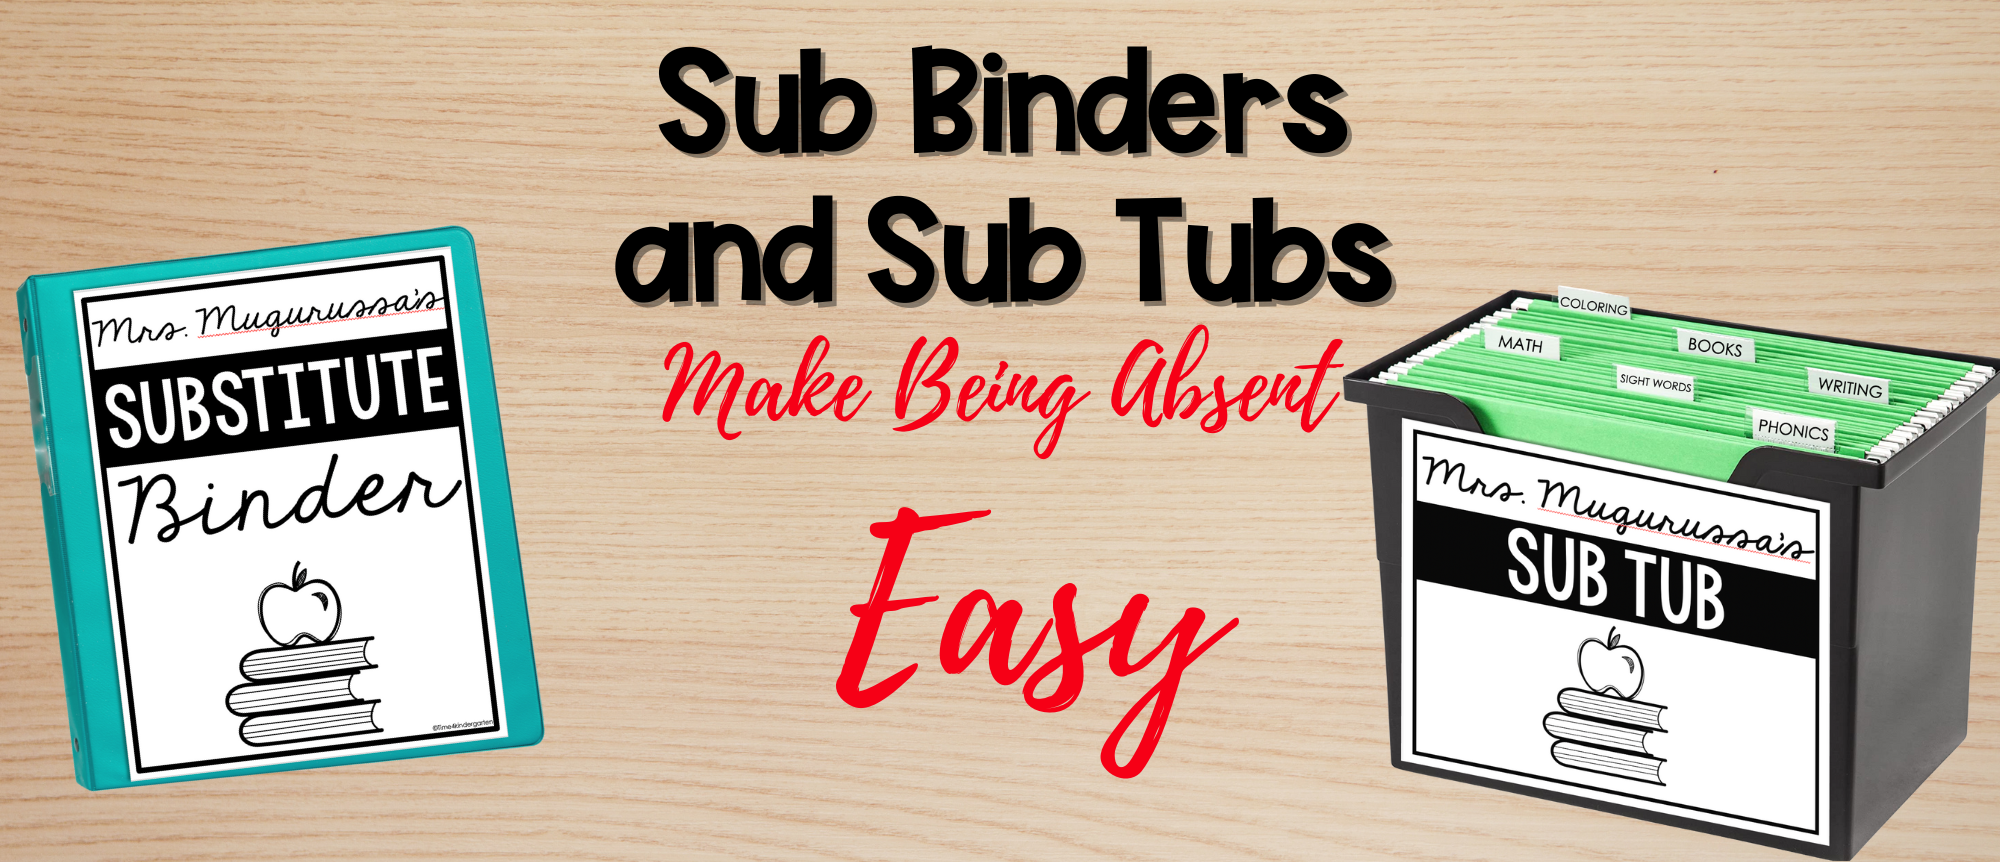 Sub tubs Sub binder and Easy Lesson plans